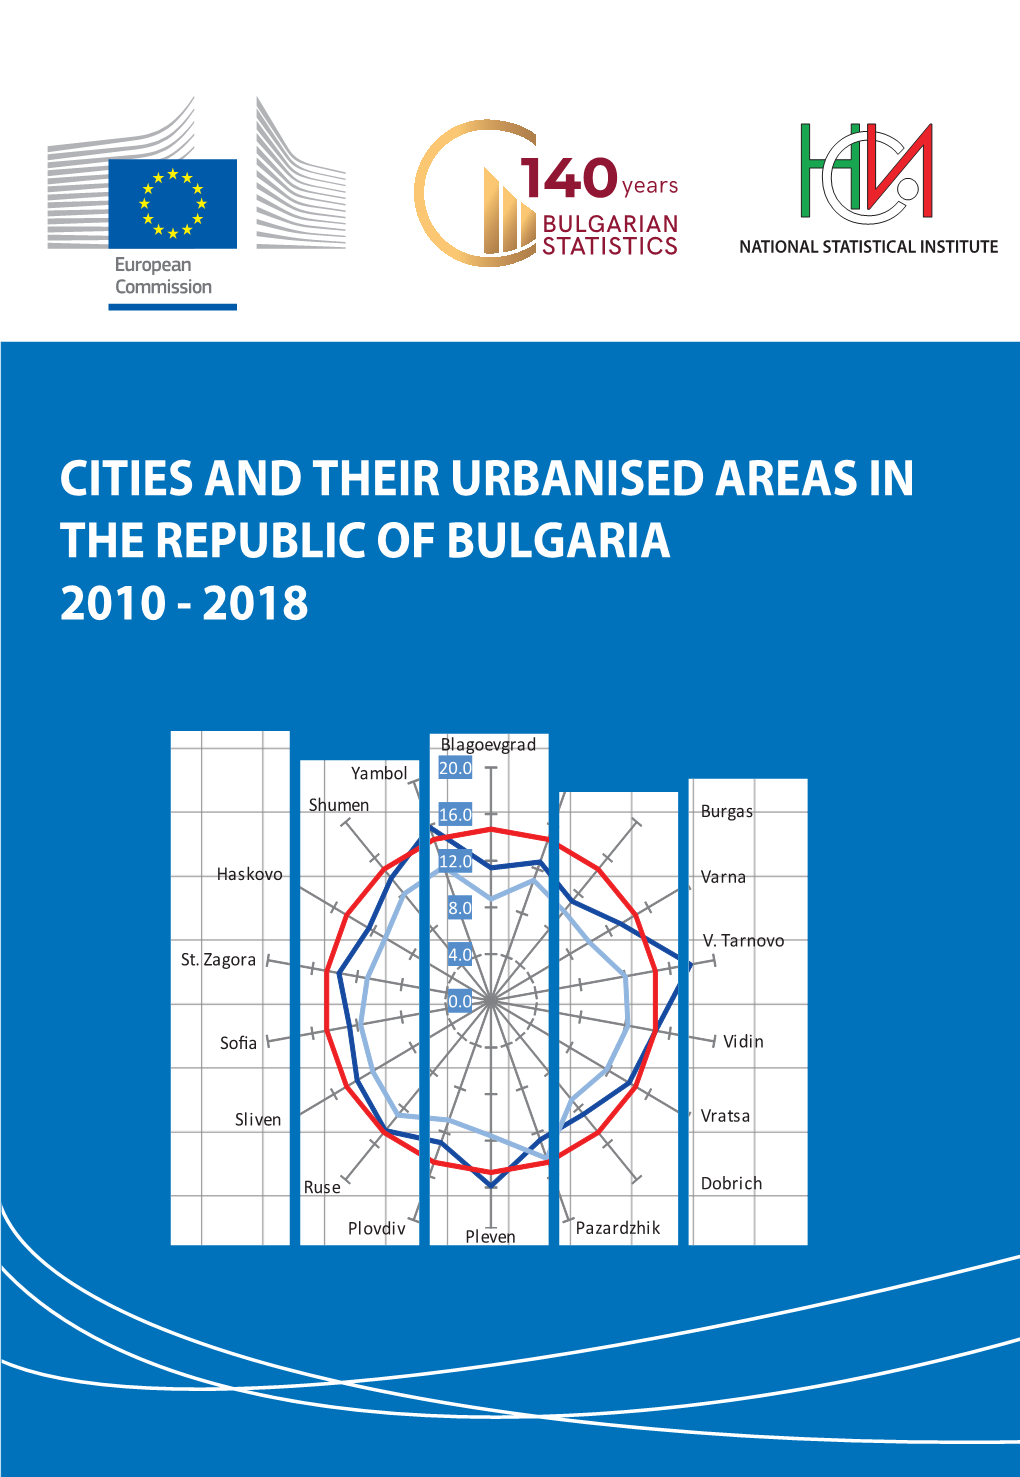 Cities and Their Urbanised Areas in the Republic of Bulgaria, 2010